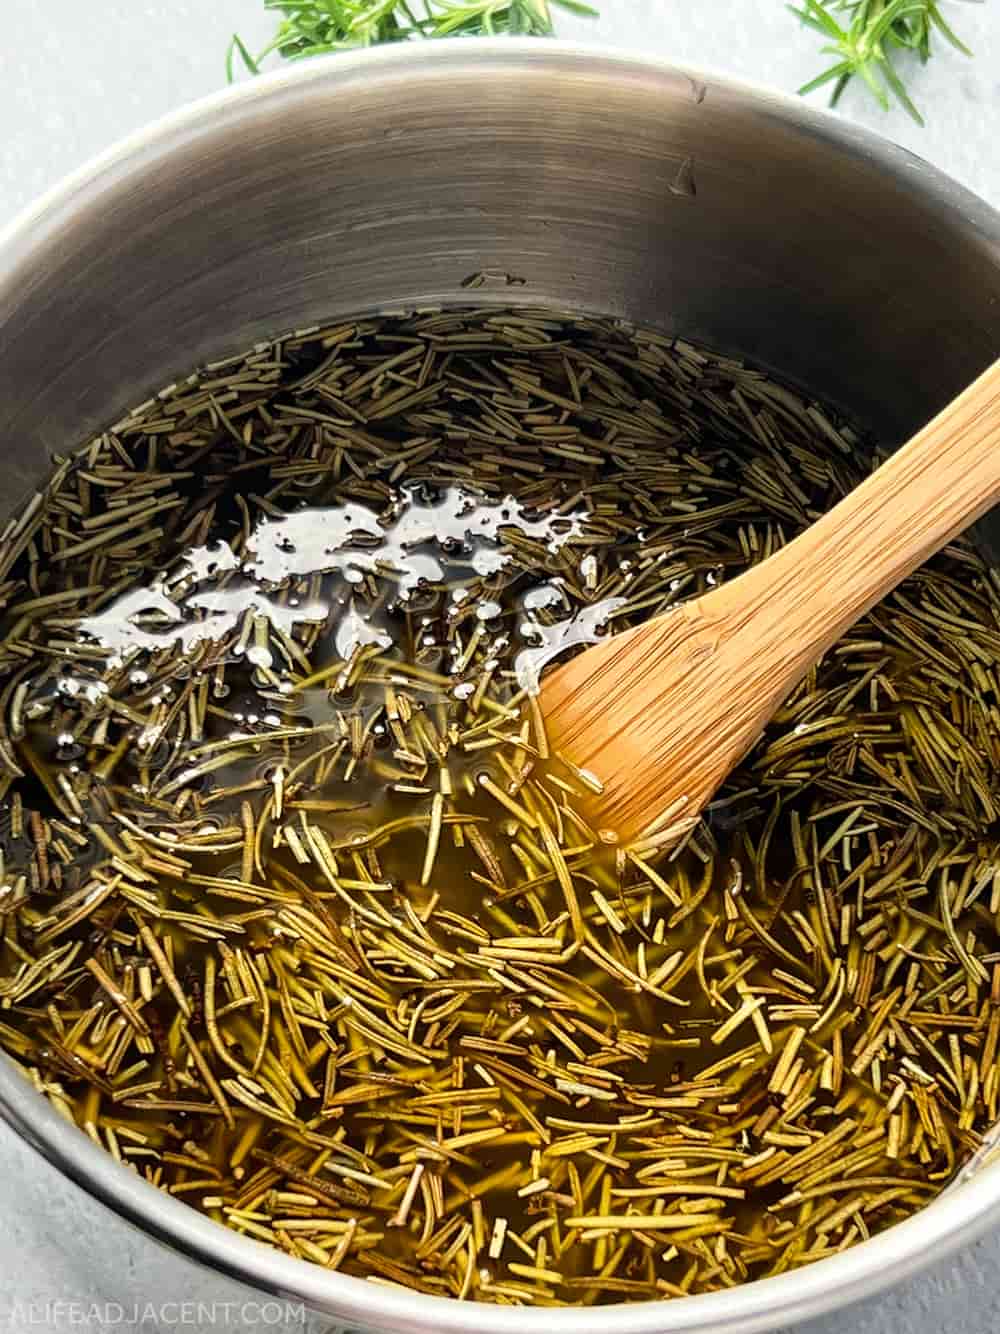 Rosemary infused oil cooking in pot.